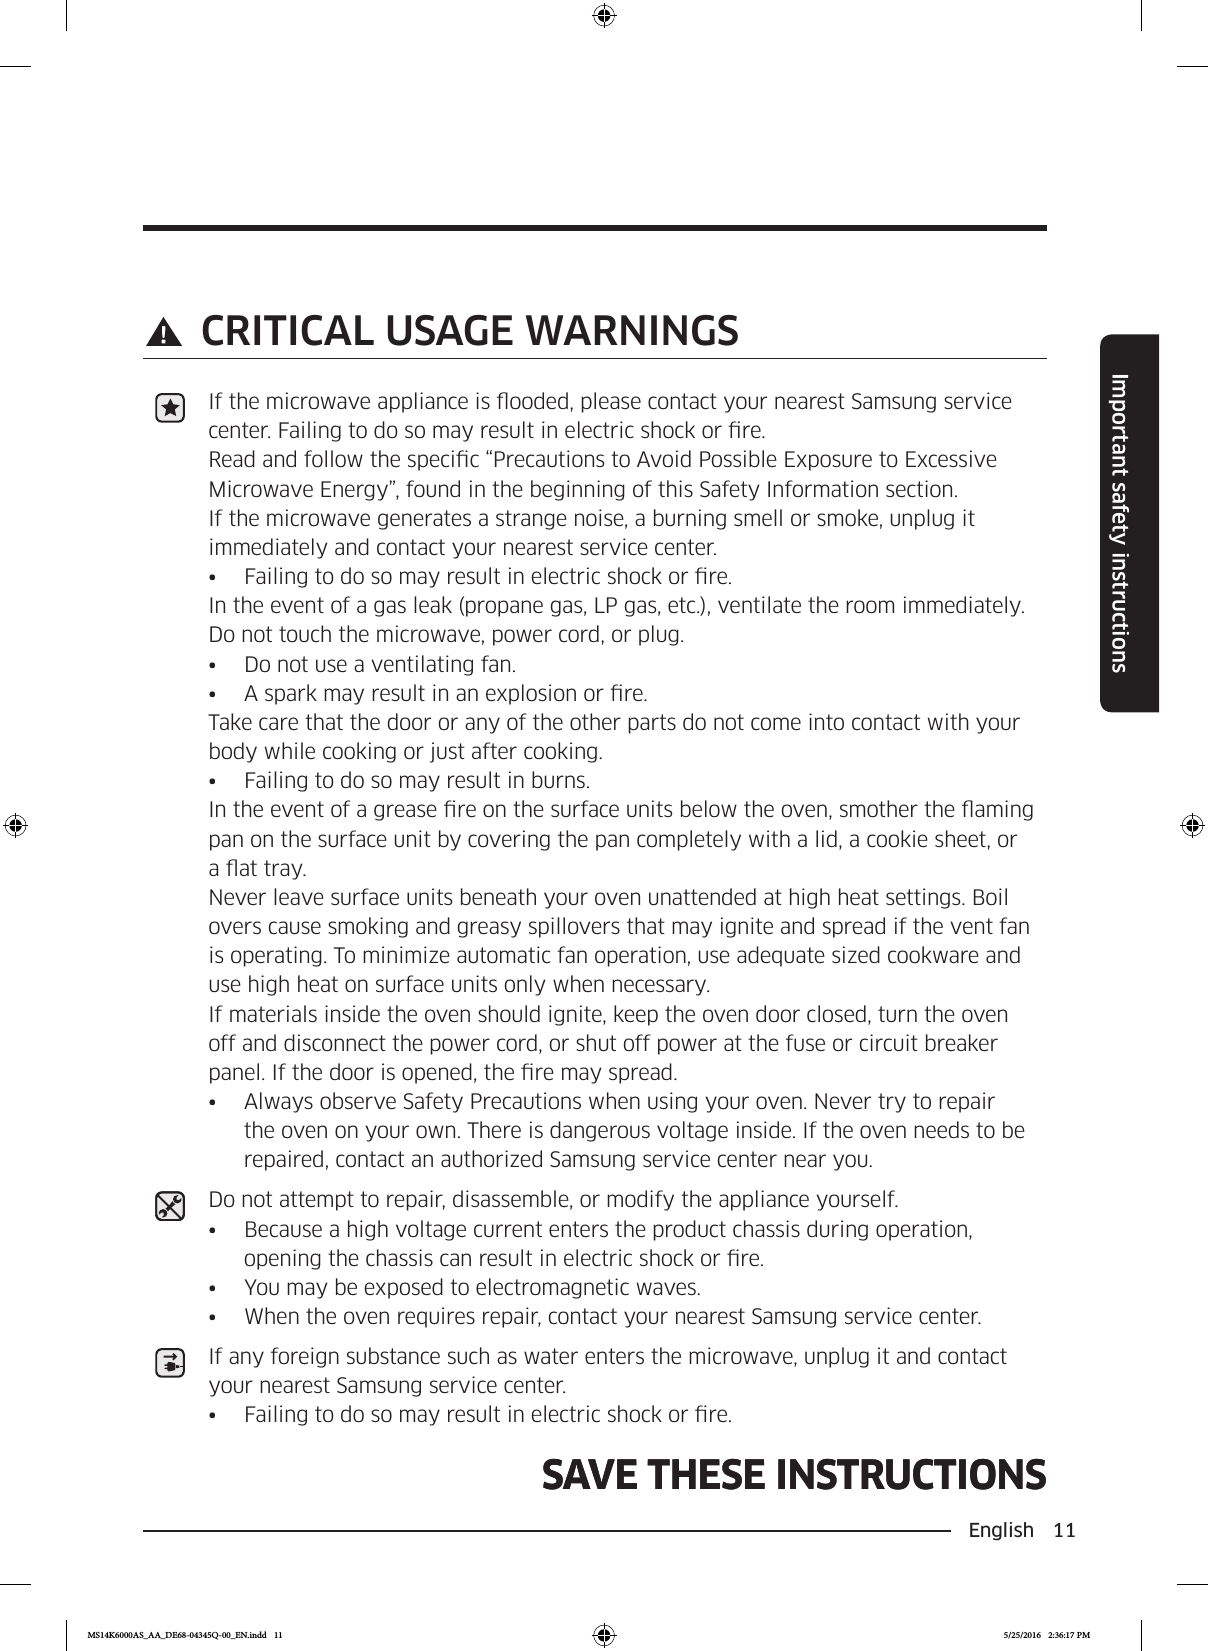 English 11Important safety instructionsSAVE THESE INSTRUCTIONSSAVE THESE INSTRUCTIONS CRITICAL USAGE WARNINGSIf the microwave appliance is ooded, please contact your nearest Samsung service center. Failing to do so may result in electric shock or re.Read and follow the specic “Precautions to Avoid Possible Exposure to Excessive Microwave Energy”, found in the beginning of this Safety Information section.If the microwave generates a strange noise, a burning smell or smoke, unplug it immediately and contact your nearest service center.•  Failing to do so may result in electric shock or re.In the event of a gas leak (propane gas, LP gas, etc.), ventilate the room immediately. Do not touch the microwave, power cord, or plug.•  Do not use a ventilating fan.•  A spark may result in an explosion or re.Take care that the door or any of the other parts do not come into contact with your body while cooking or just after cooking.•  Failing to do so may result in burns.In the event of a grease re on the surface units below the oven, smother the aming pan on the surface unit by covering the pan completely with a lid, a cookie sheet, or a at tray. Never leave surface units beneath your oven unattended at high heat settings. Boil overs cause smoking and greasy spillovers that may ignite and spread if the vent fan is operating. To minimize automatic fan operation, use adequate sized cookware and use high heat on surface units only when necessary.If materials inside the oven should ignite, keep the oven door closed, turn the oven off and disconnect the power cord, or shut off power at the fuse or circuit breaker panel. If the door is opened, the re may spread.•  Always observe Safety Precautions when using your oven. Never try to repair the oven on your own. There is dangerous voltage inside. If the oven needs to be repaired, contact an authorized Samsung service center near you.Do not attempt to repair, disassemble, or modify the appliance yourself.•  Because a high voltage current enters the product chassis during operation, opening the chassis can result in electric shock or re.•  You may be exposed to electromagnetic waves.•  When the oven requires repair, contact your nearest Samsung service center.If any foreign substance such as water enters the microwave, unplug it and contact your nearest Samsung service center.•  Failing to do so may result in electric shock or re.MS14K6000AS_AA_DE68-04345Q-00_EN.indd   11 5/25/2016   2:36:17 PM